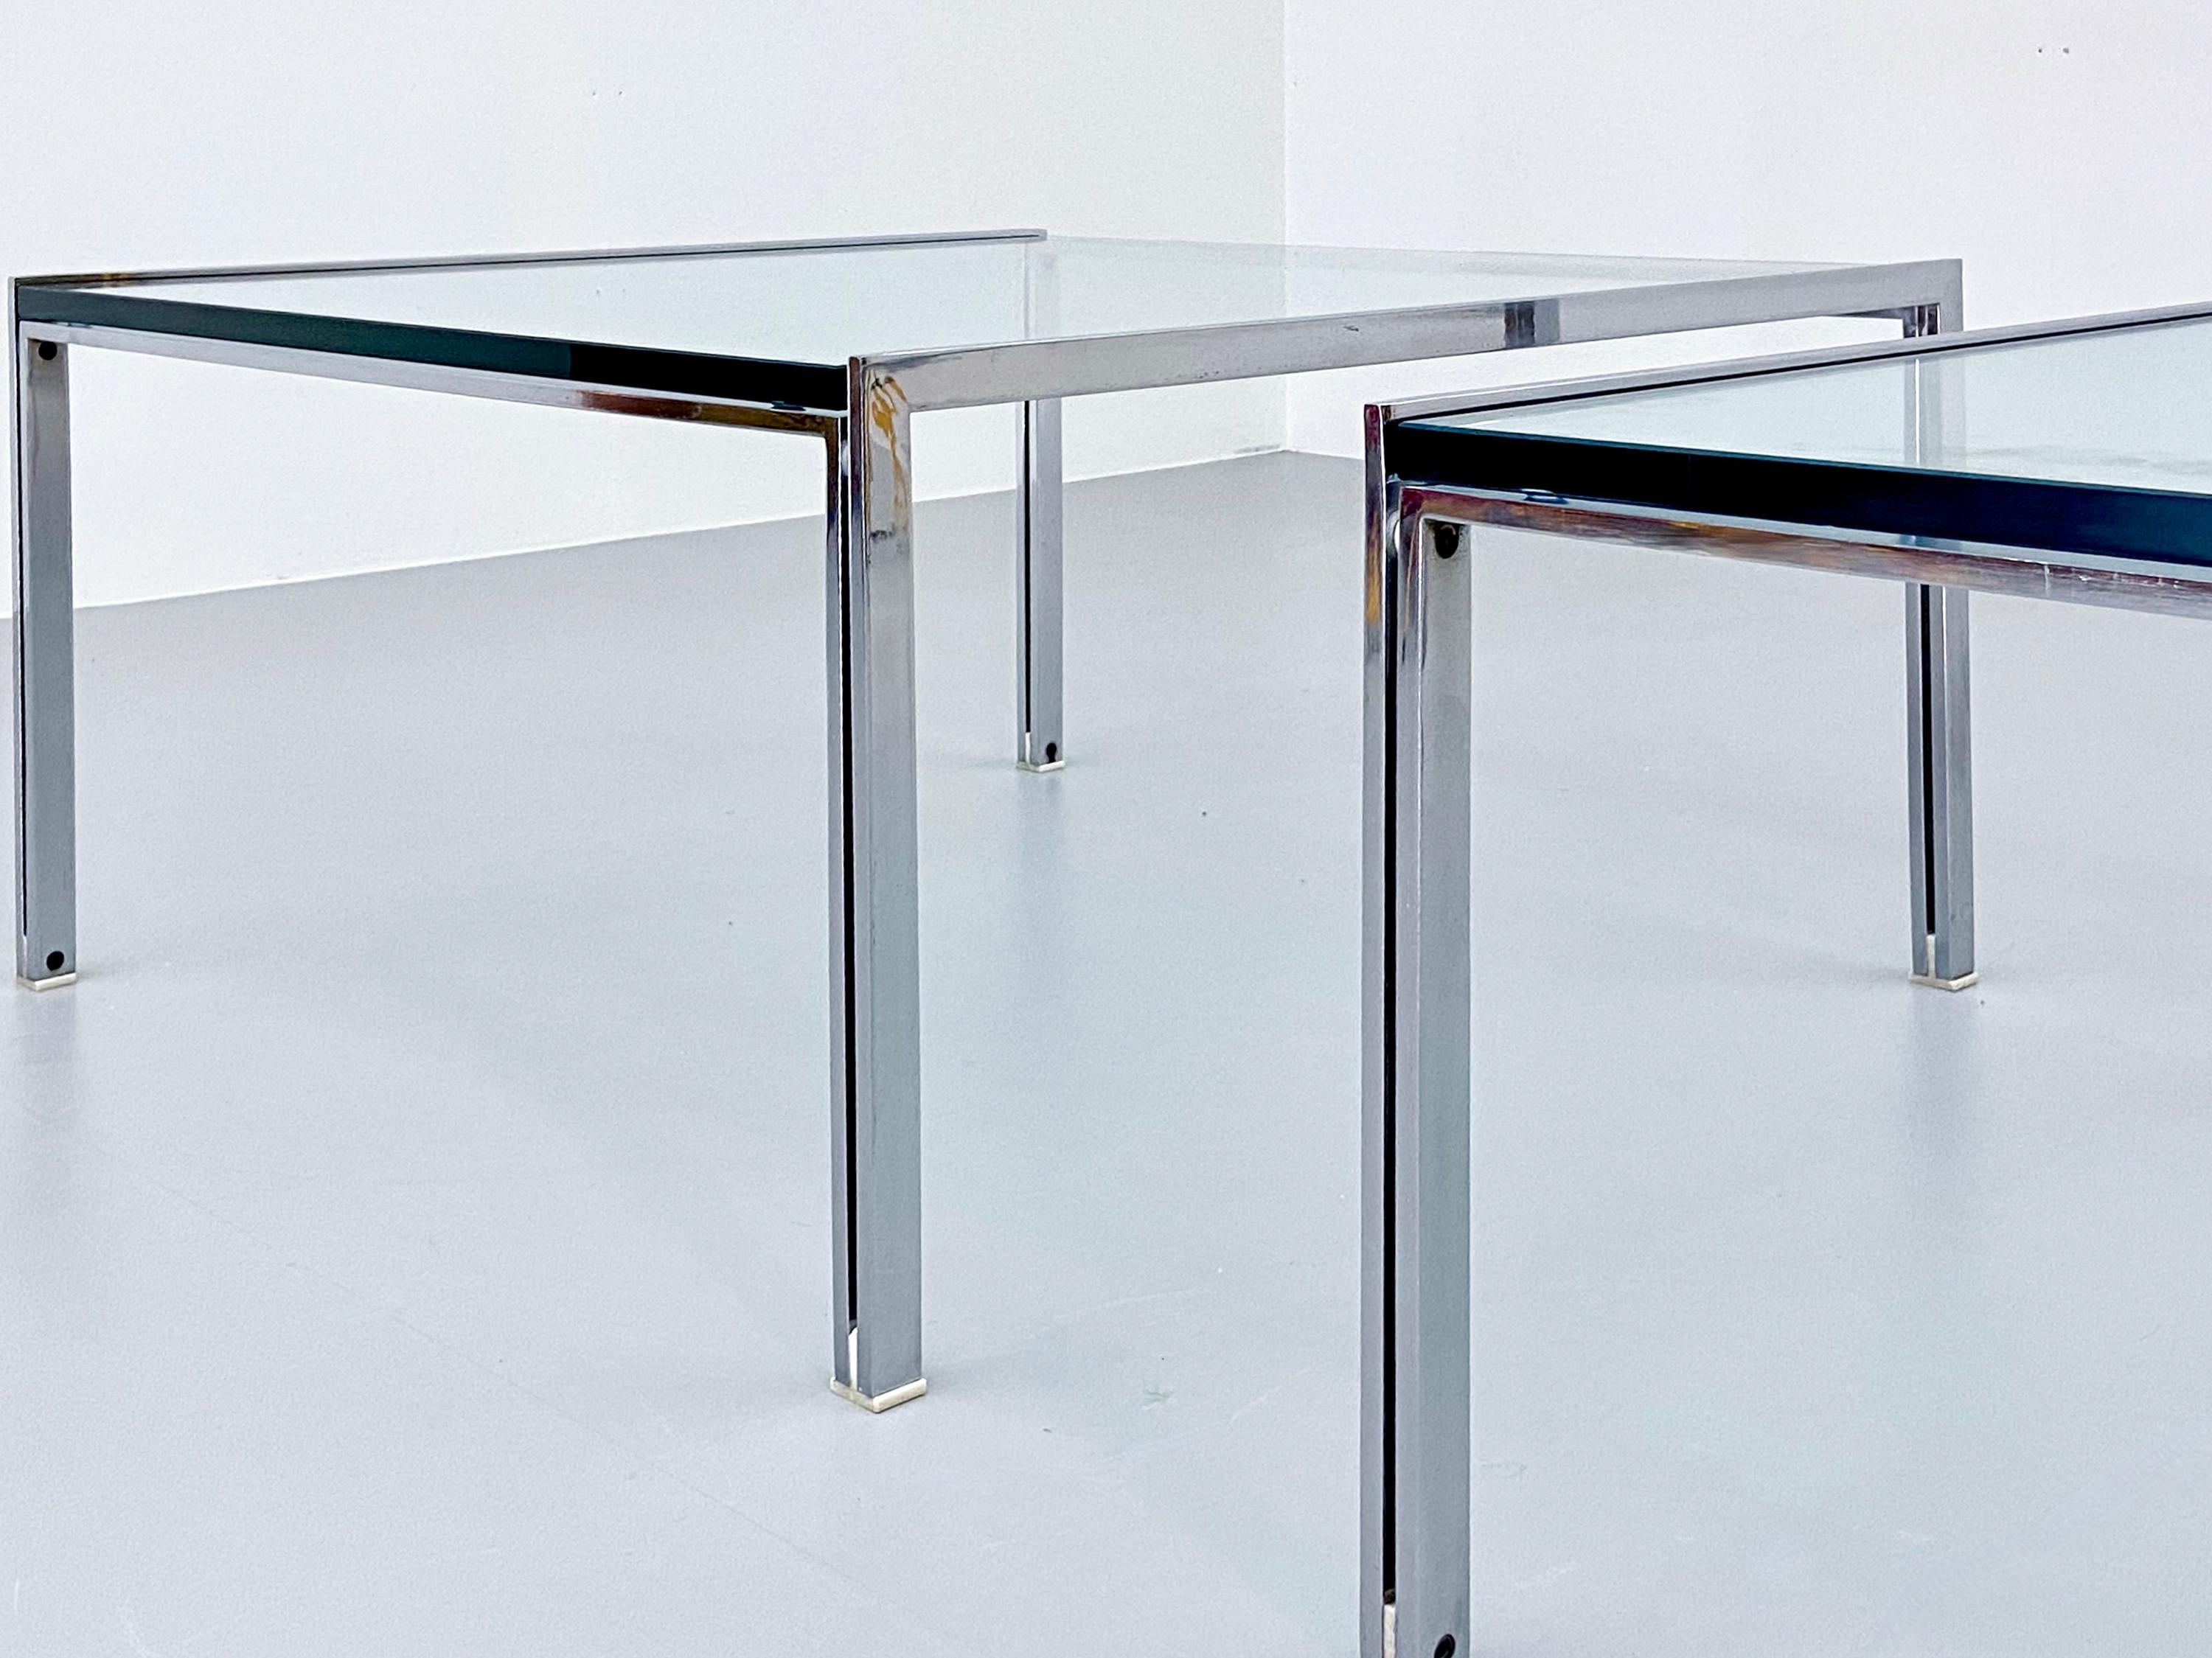  Ross Littel 'Luar' Coffee Table in Glass and Metal for Icf Padova, Italy 1970's For Sale 4